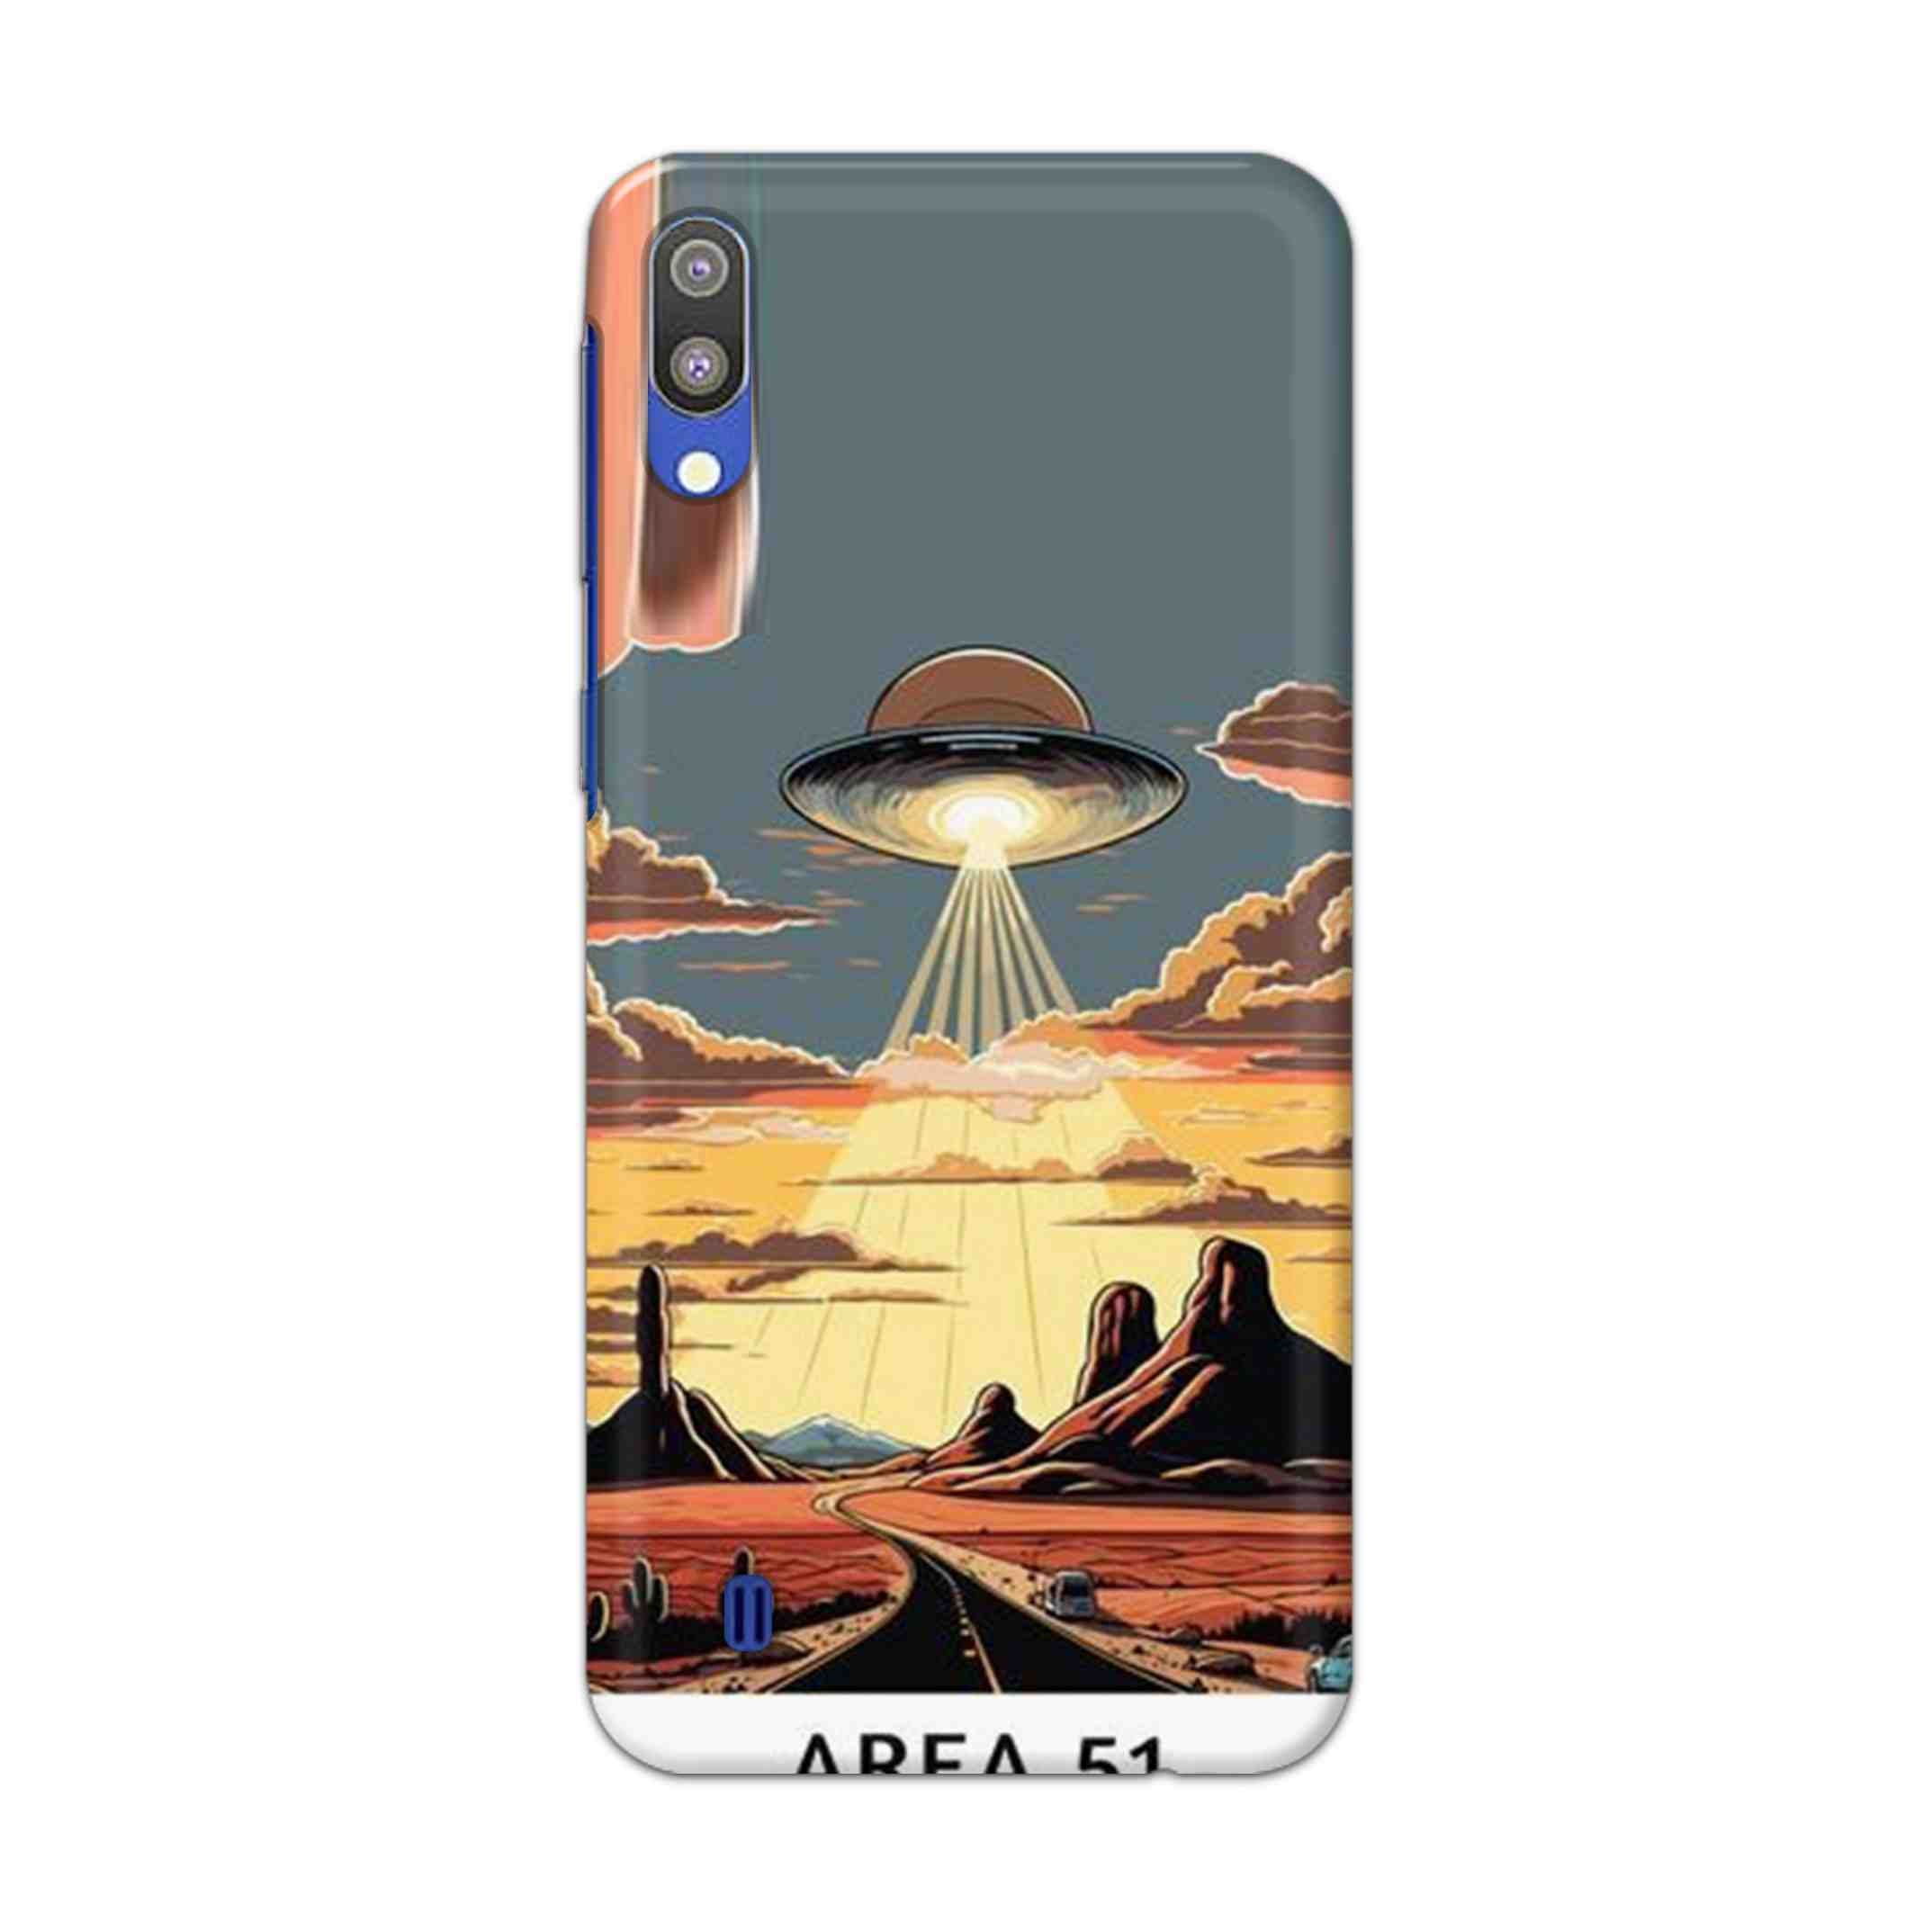 Buy Area 51 Hard Back Mobile Phone Case Cover For Samsung Galaxy M10 Online